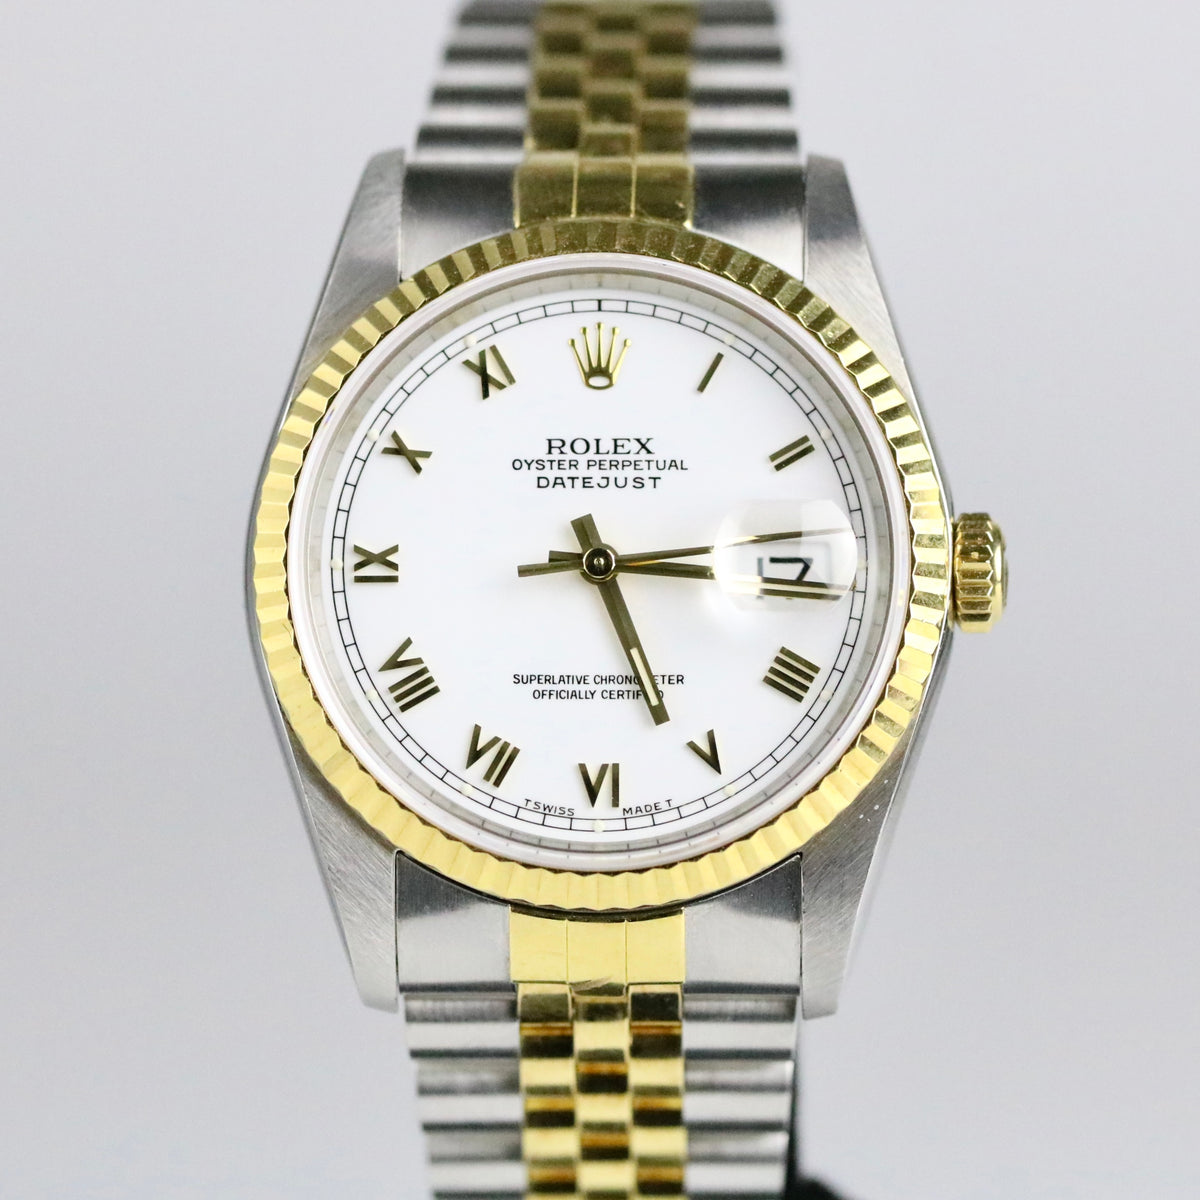 1987 Rolex 16233 Datejust 36mm White Roman Dial with Box & Papers